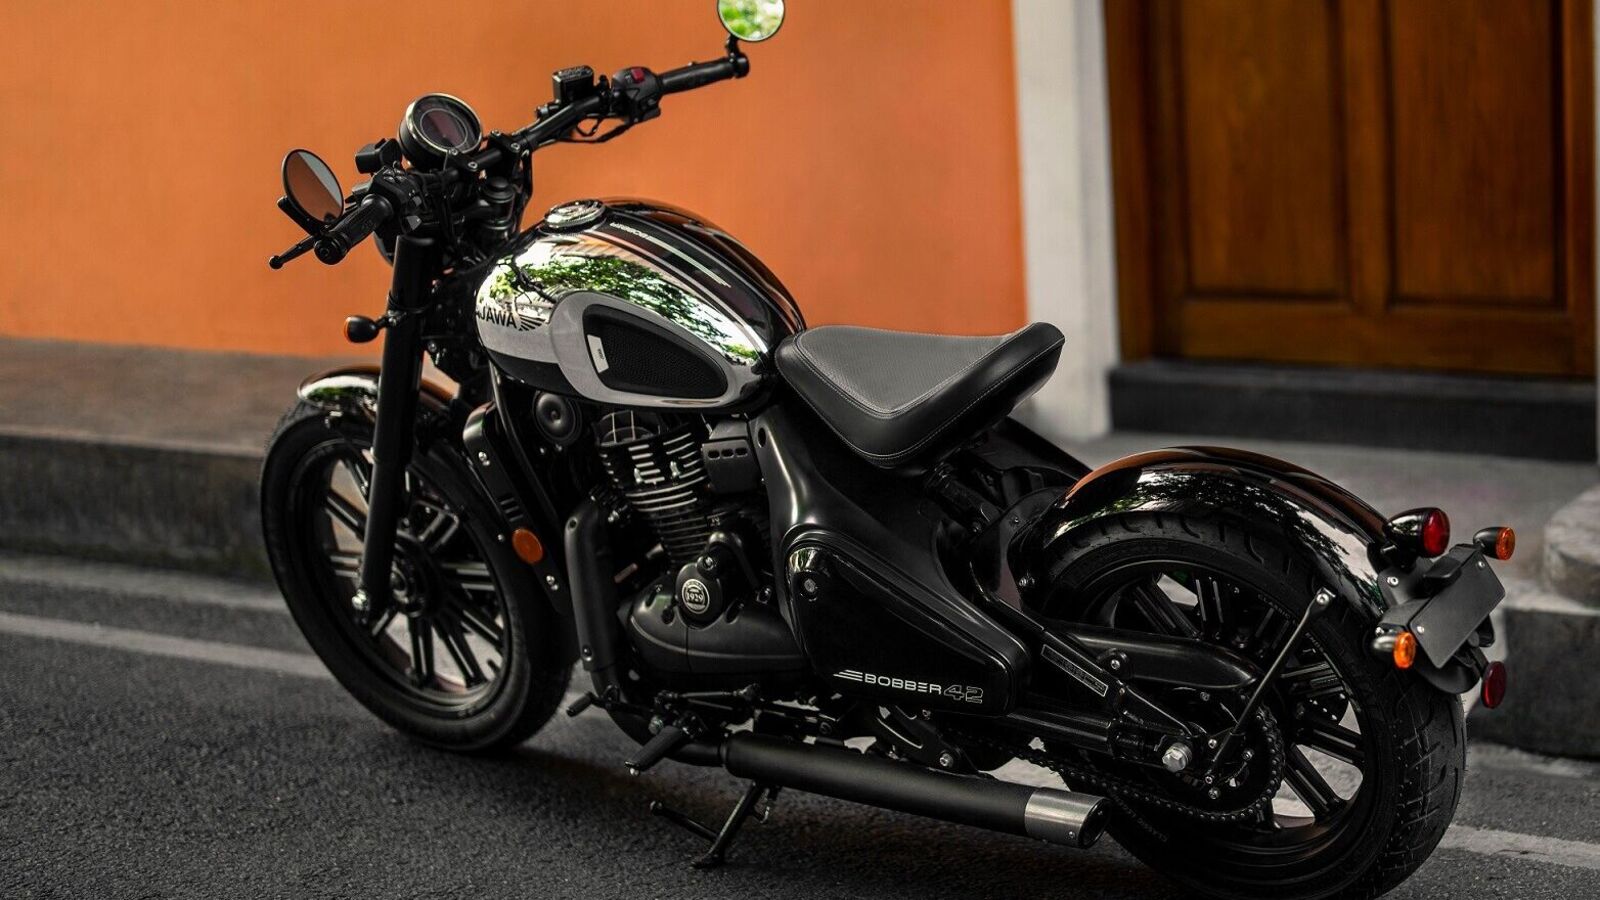 2023 Jawa 42 Bobber Black Mirror launched at Rs. 2.25 Lakh, gets